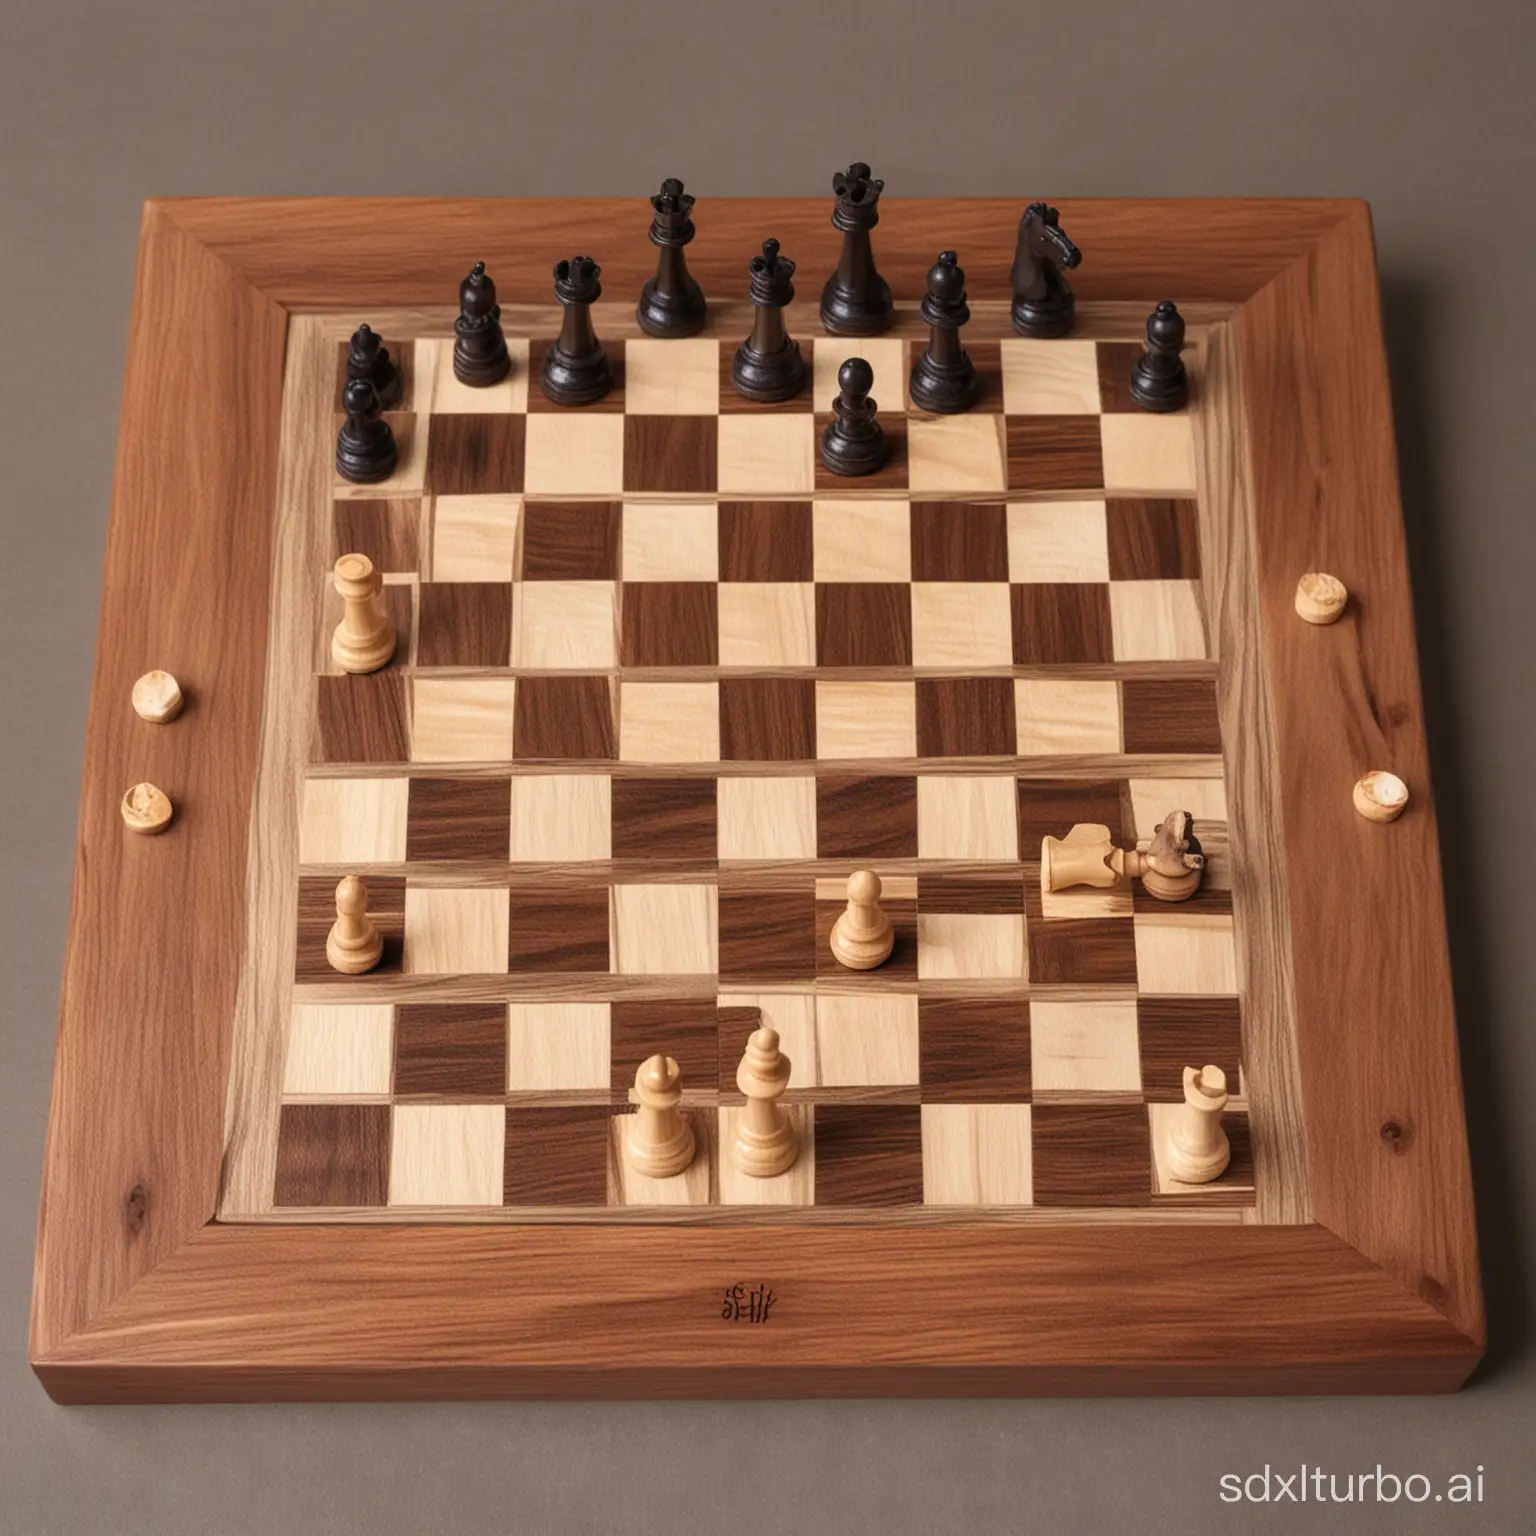 Traditional-Chess-Board-with-Minimalistic-Design